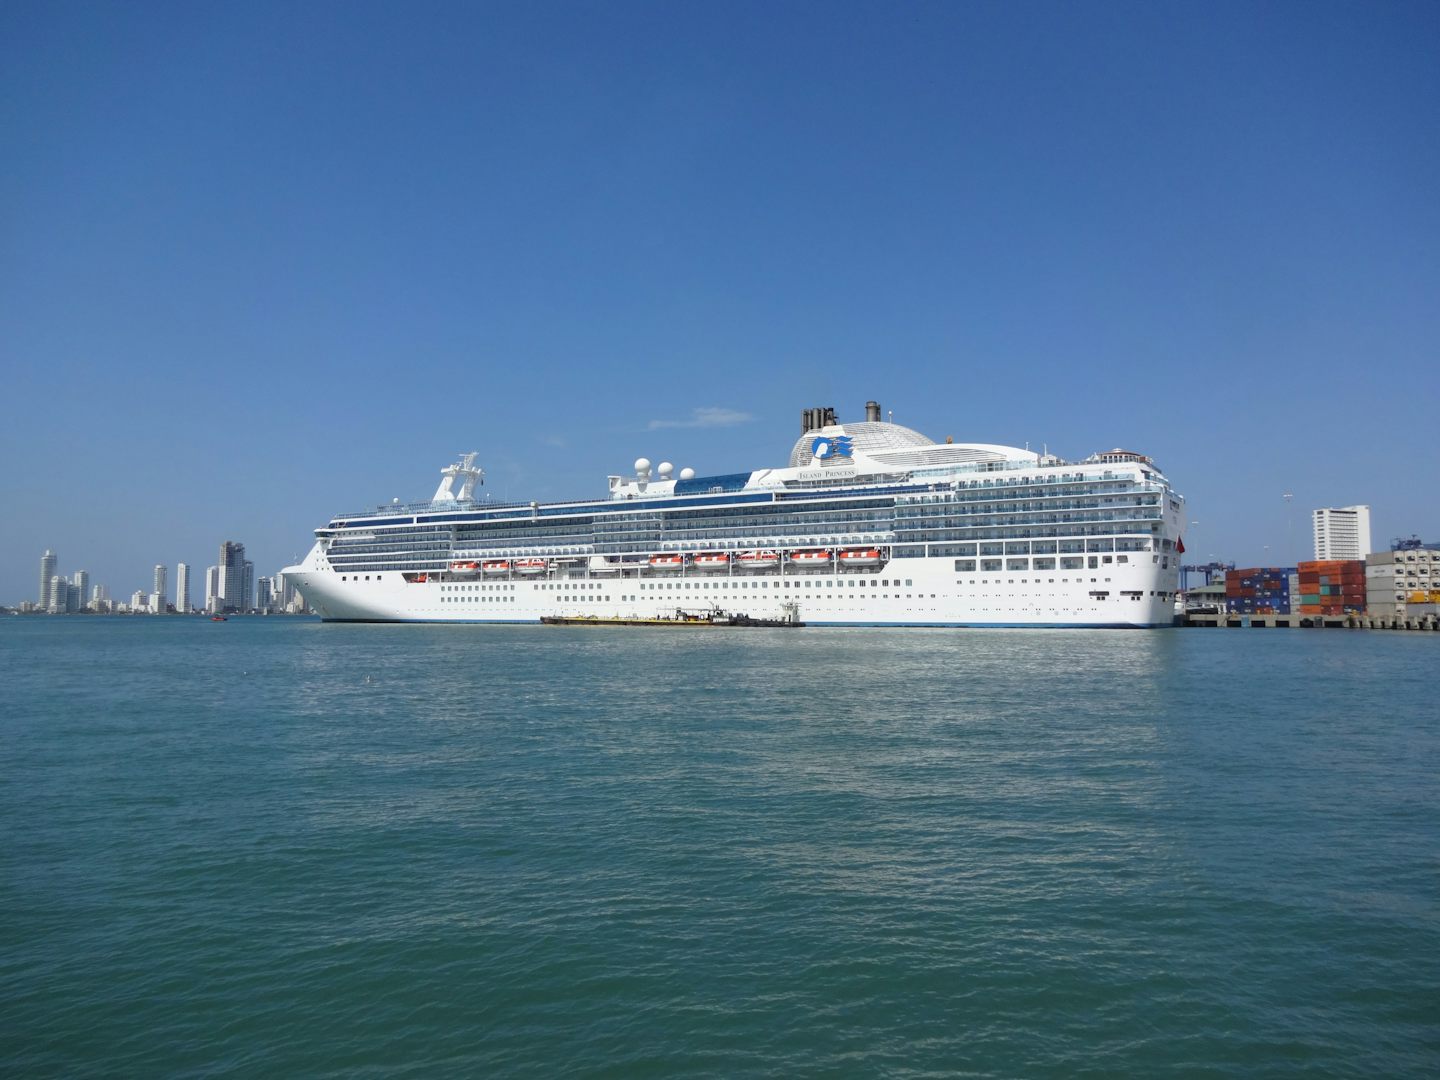 Our Ship in Cartagena